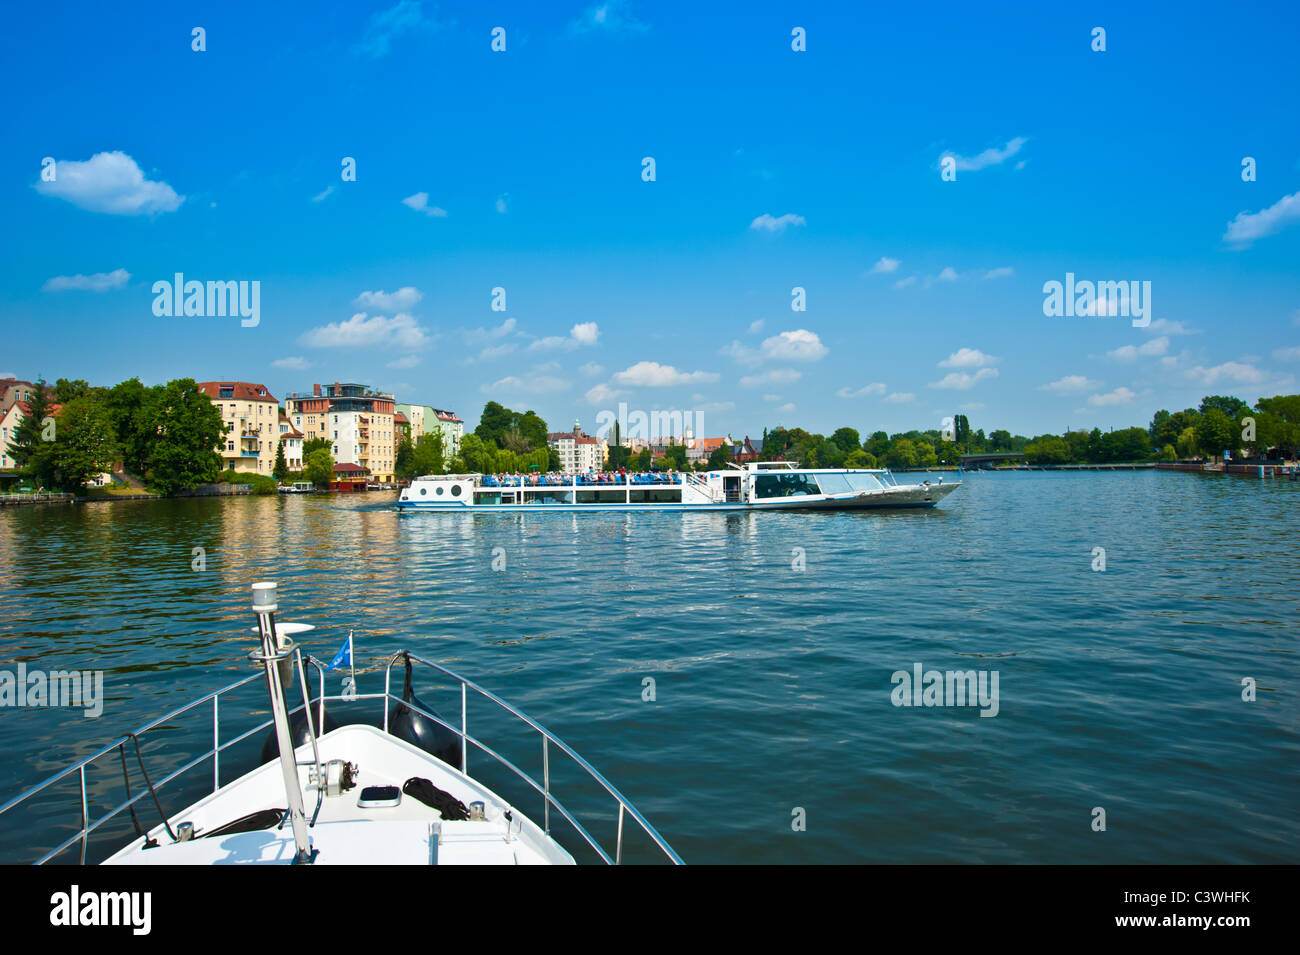 Bow of yacht and tourist boat on river Spree, Berlin, Germany Stock Photo